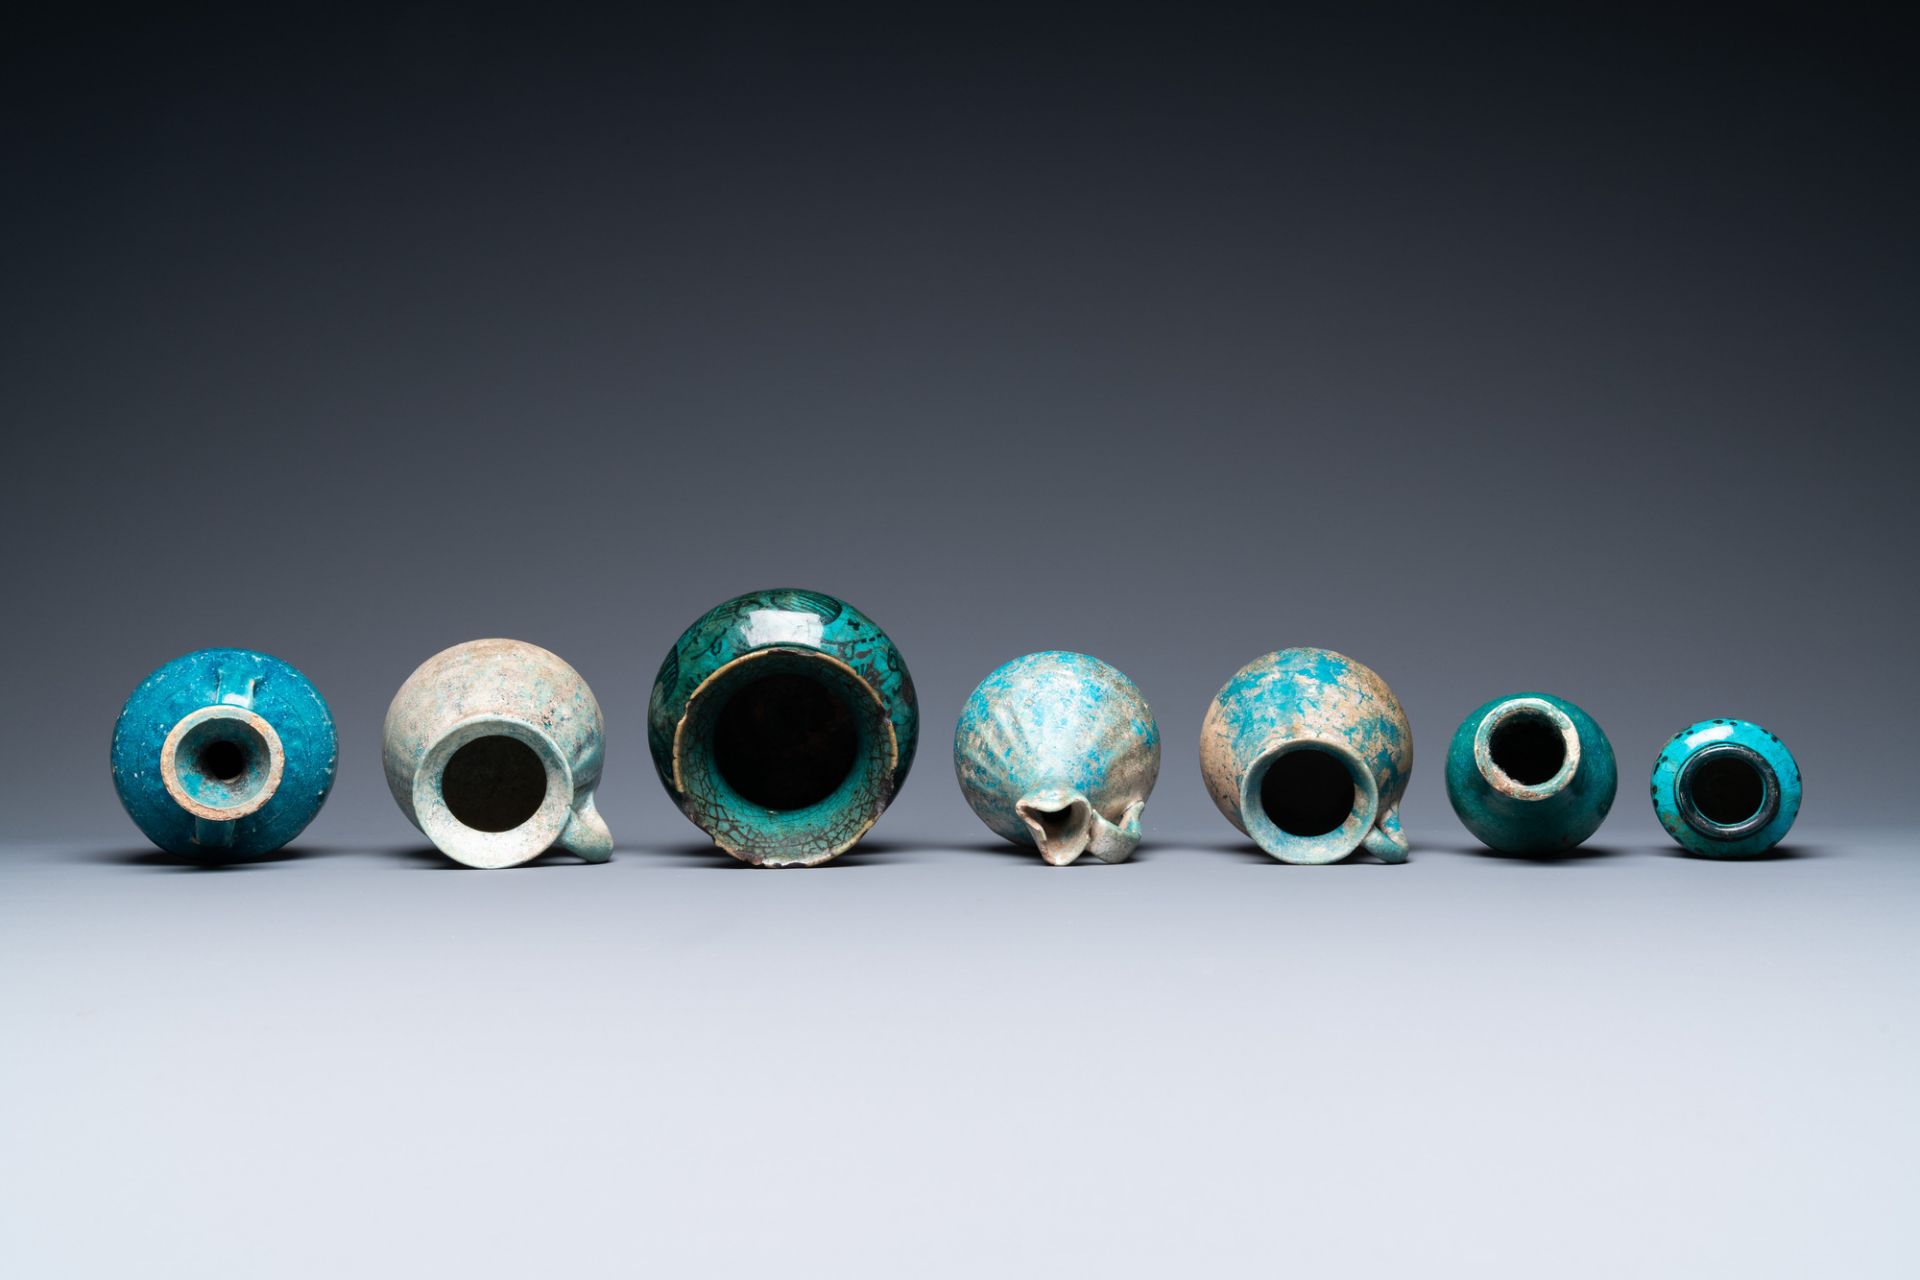 A collection of seven turquoise-glazed jugs and vases, Middle-East, 13th C. and later - Image 6 of 7